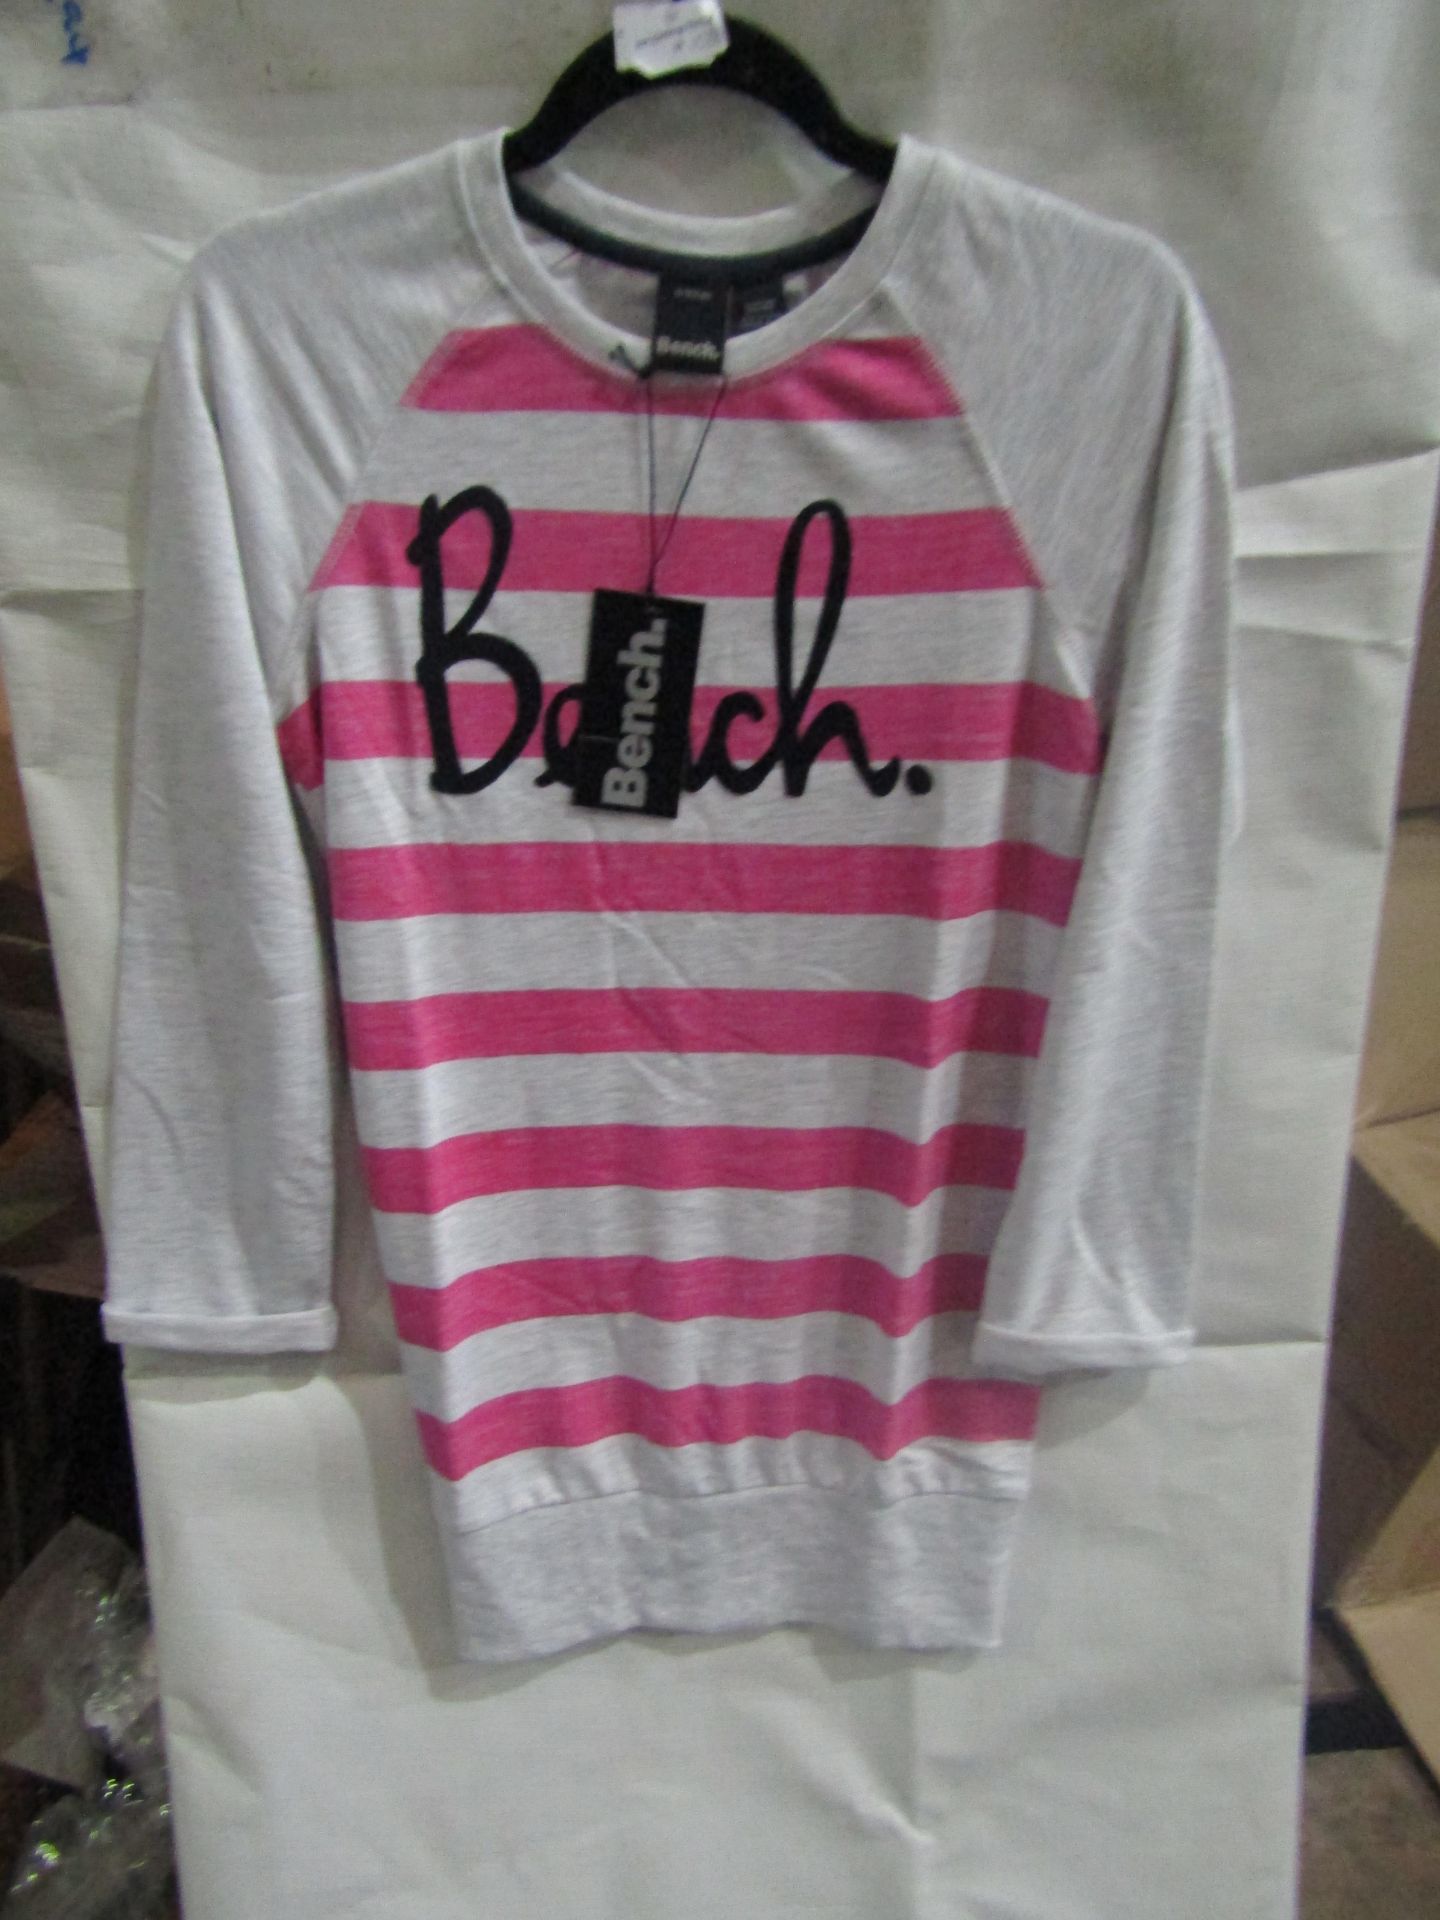 Bench Ladies Long Sleeve Top, Size: 13/14Y - Good Condition.